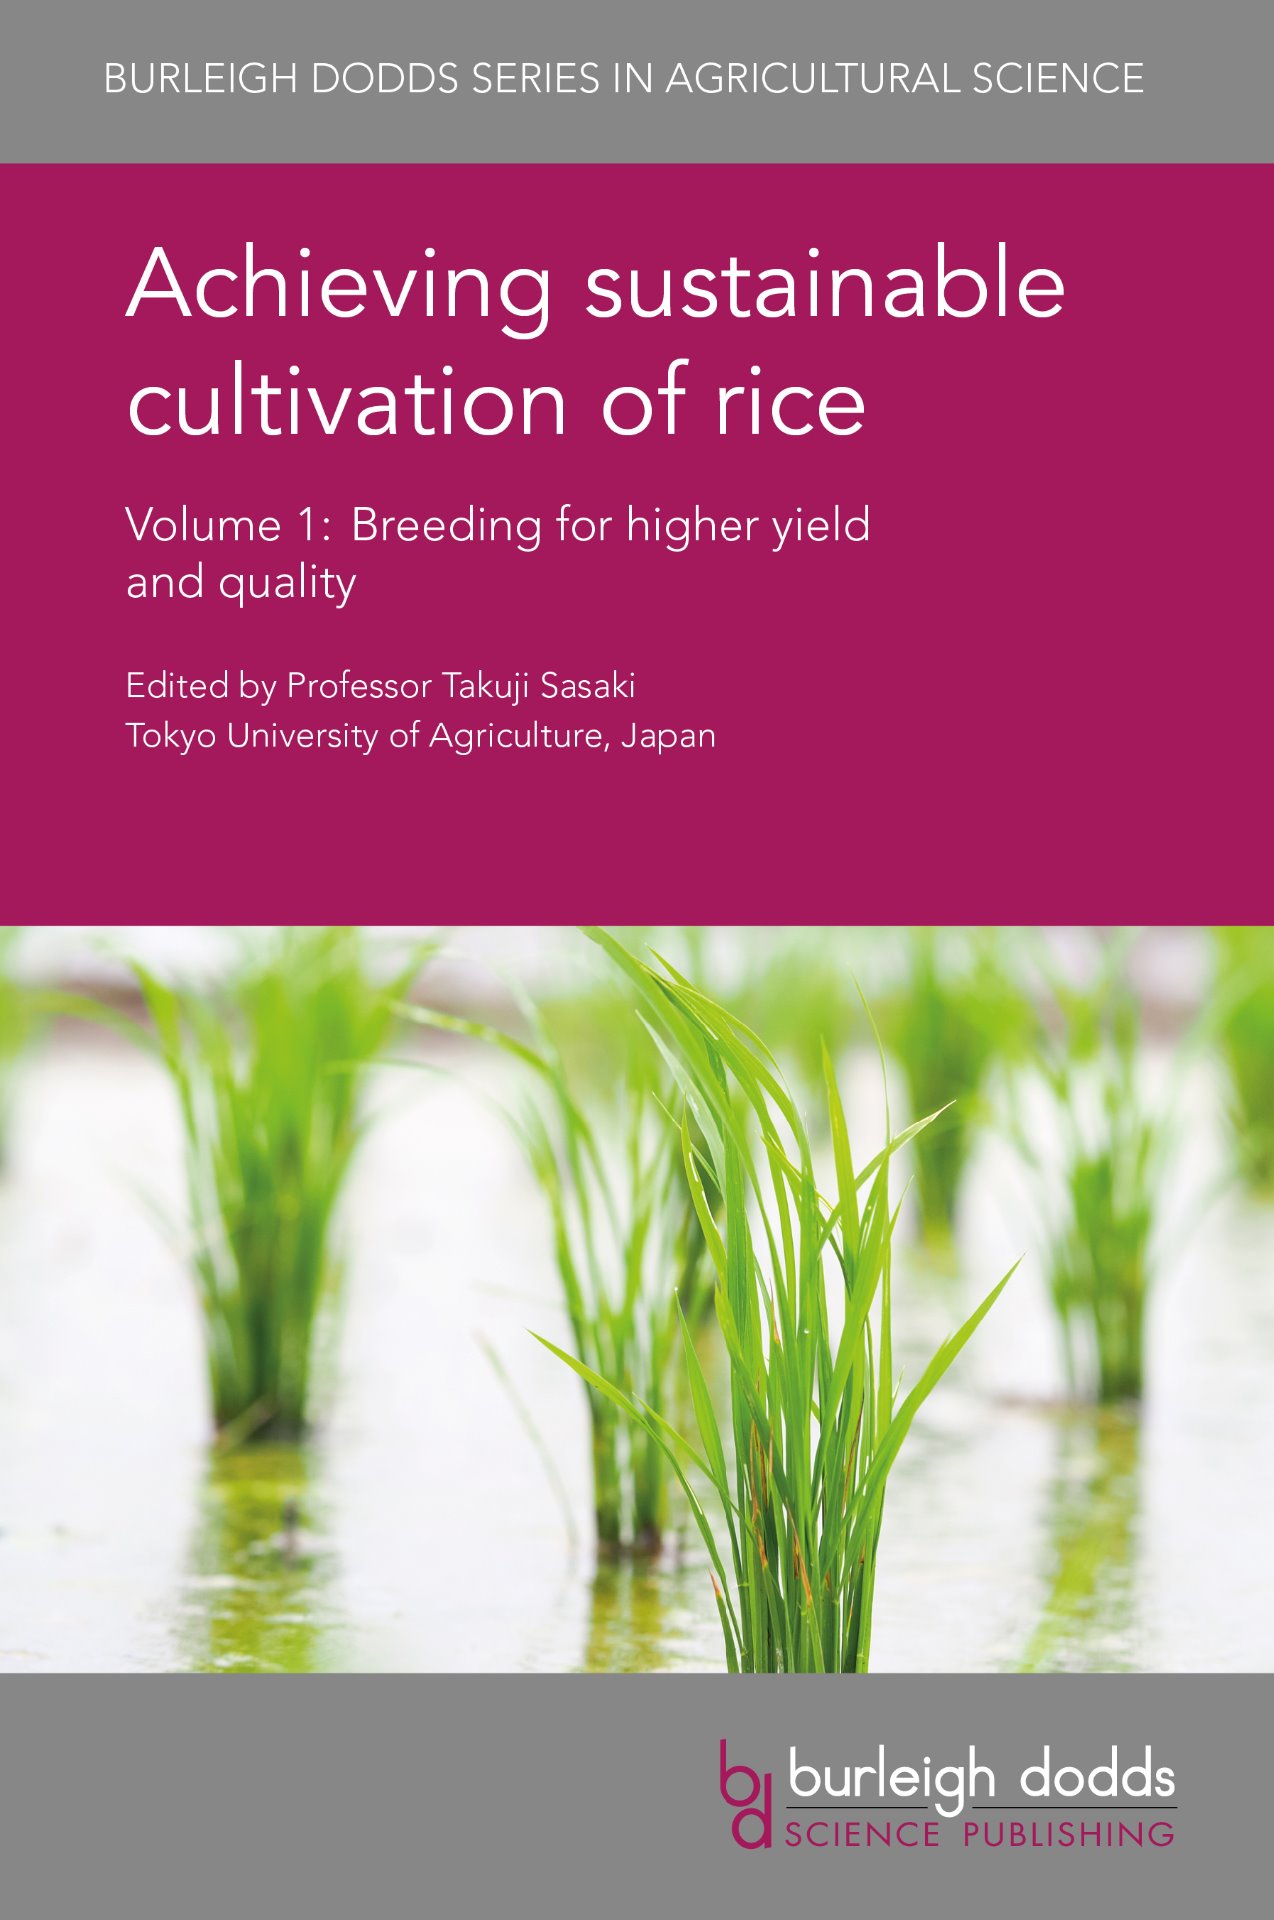 Achieving sustainable cultivation of rice Volume 1: Breeding for higher yield and quality